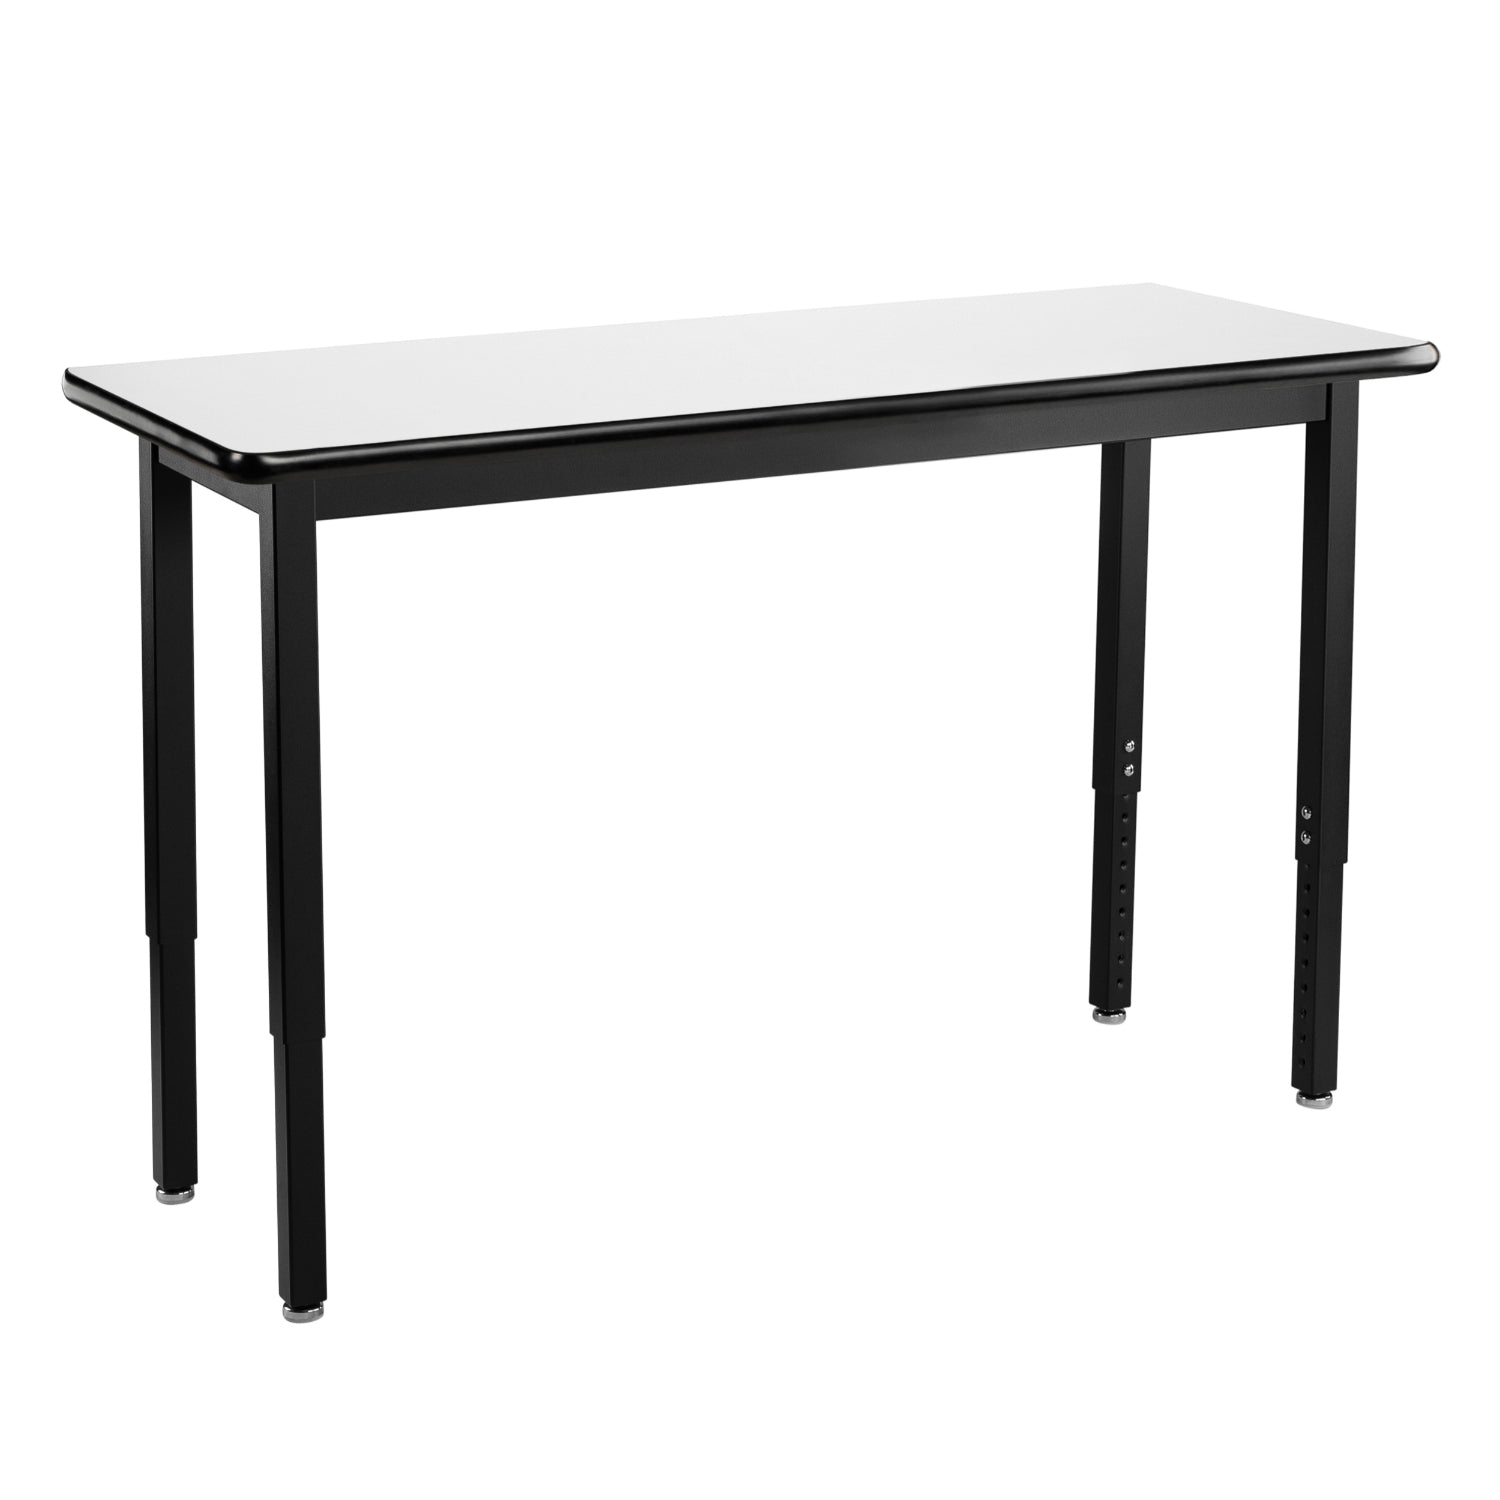 Heavy-Duty Height-Adjustable Utility Table, Black Frame, 18" x 84", Whiteboard High-Pressure Laminate Top